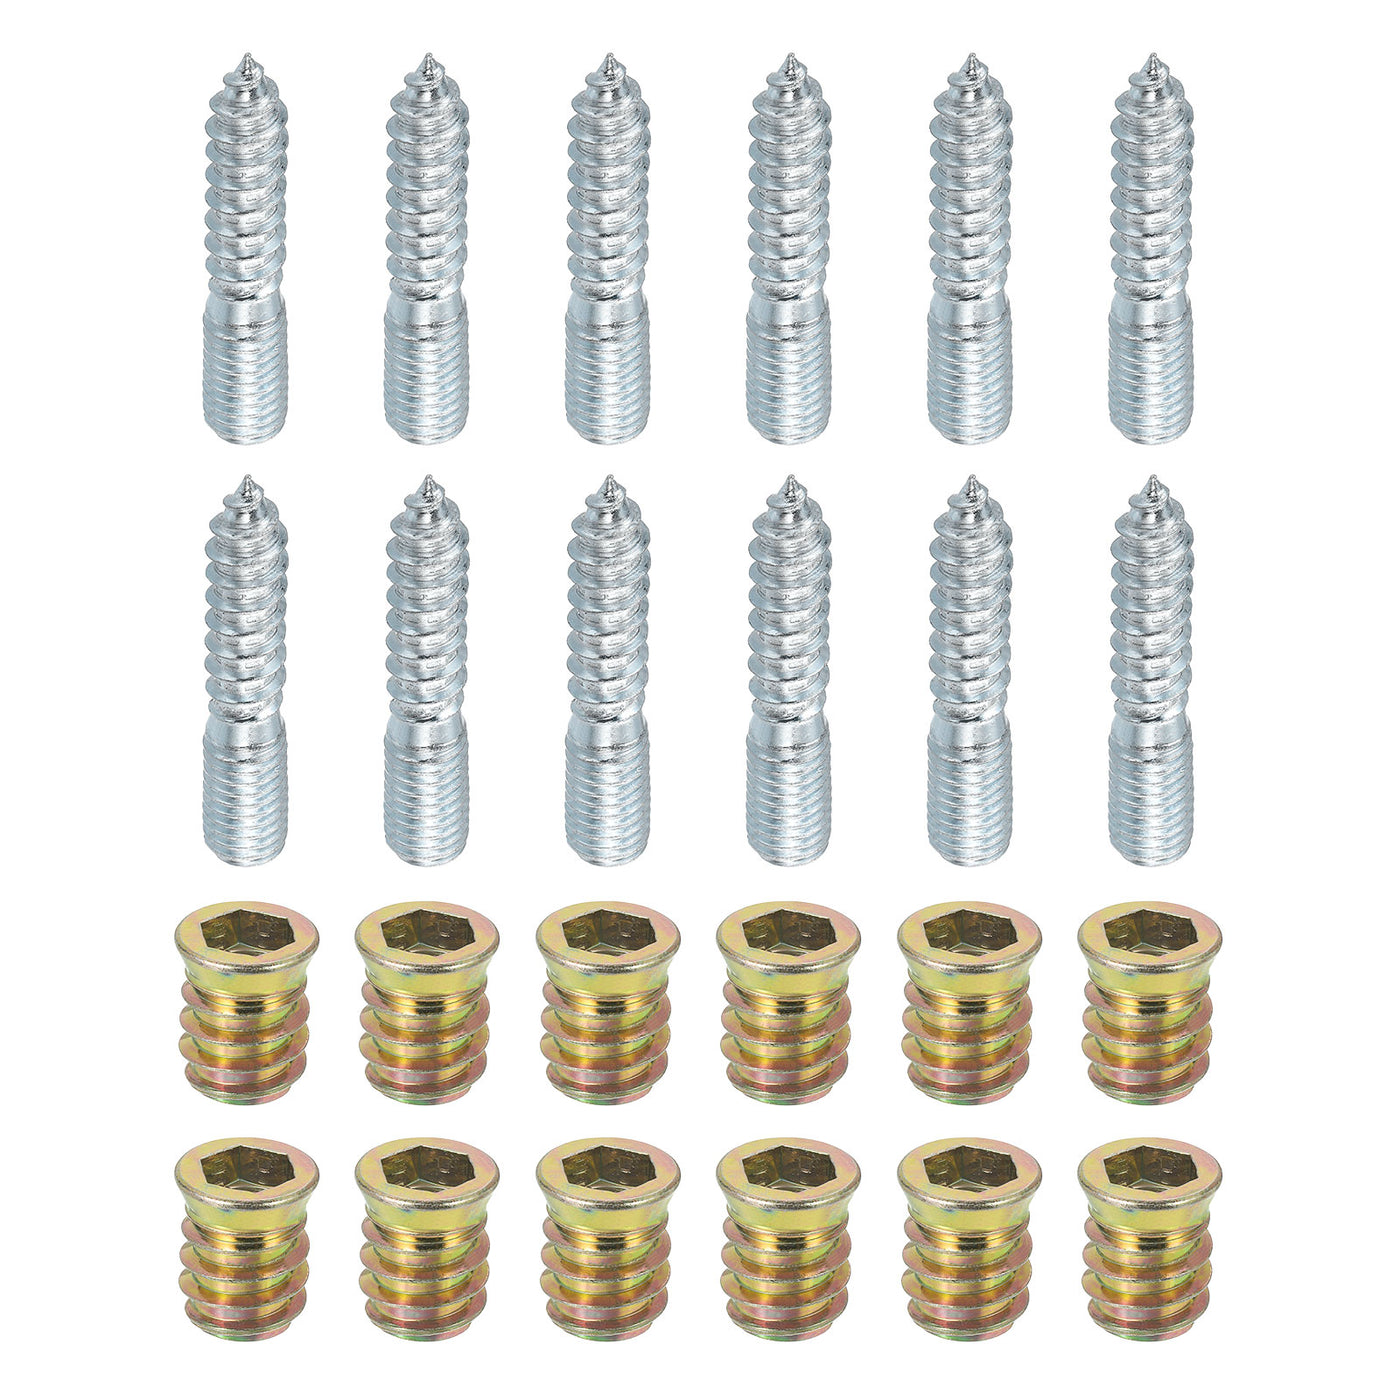 uxcell Uxcell 12pcs M10x50mm Hanger Bolts with 12pcs M10x20mm Threaded Insert Nuts Interface